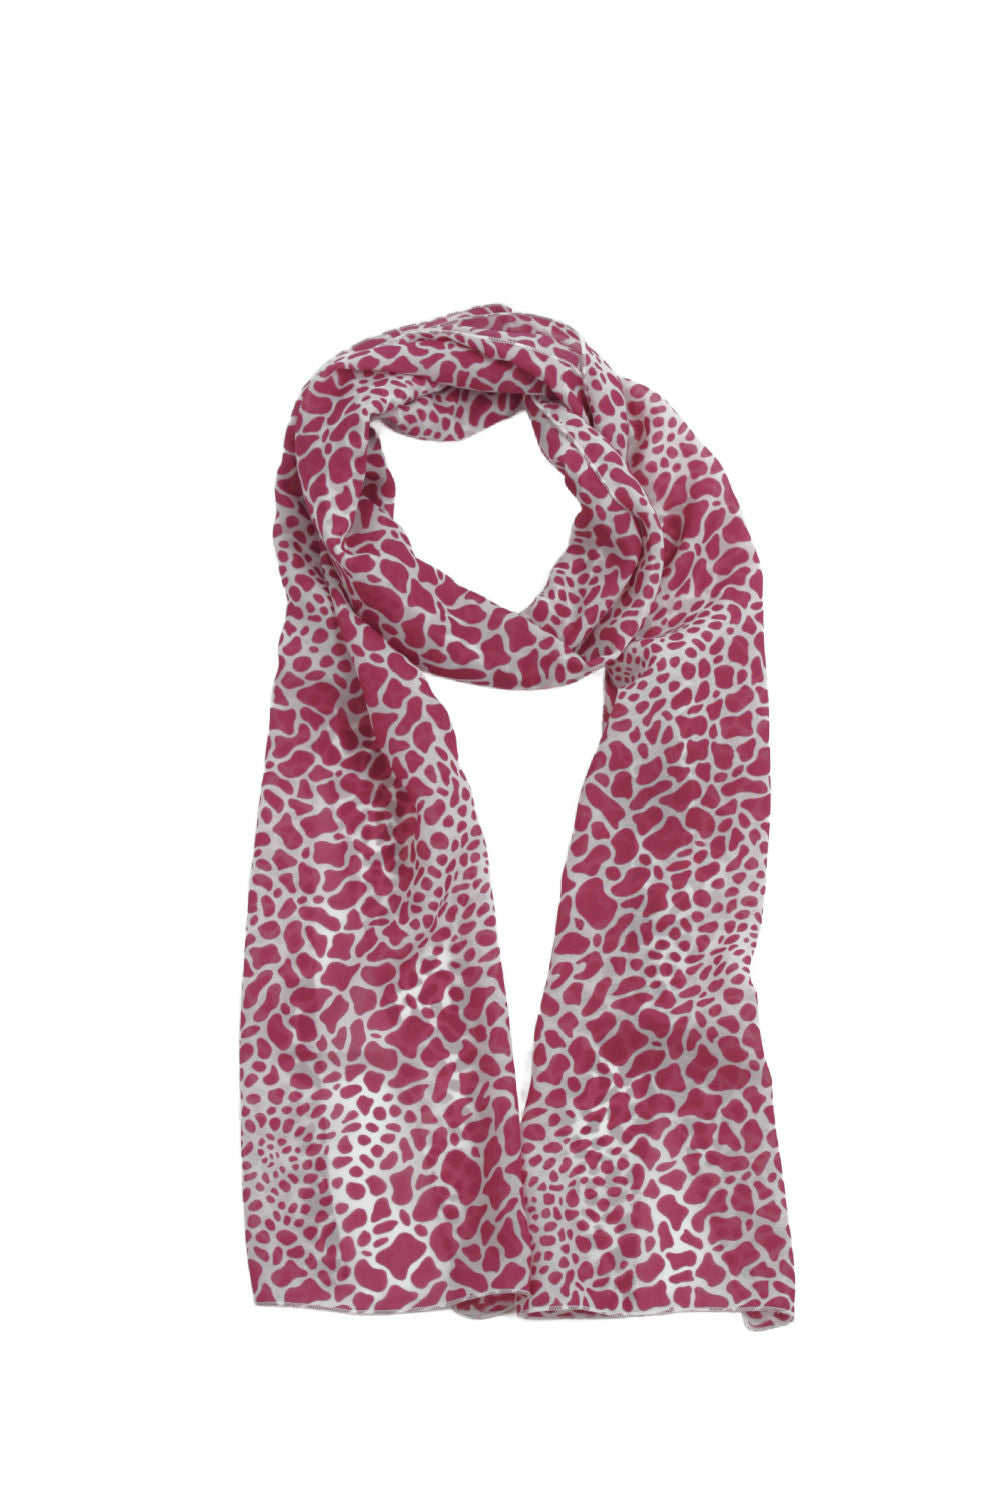 leopard-print-scarf-pink-rose-white